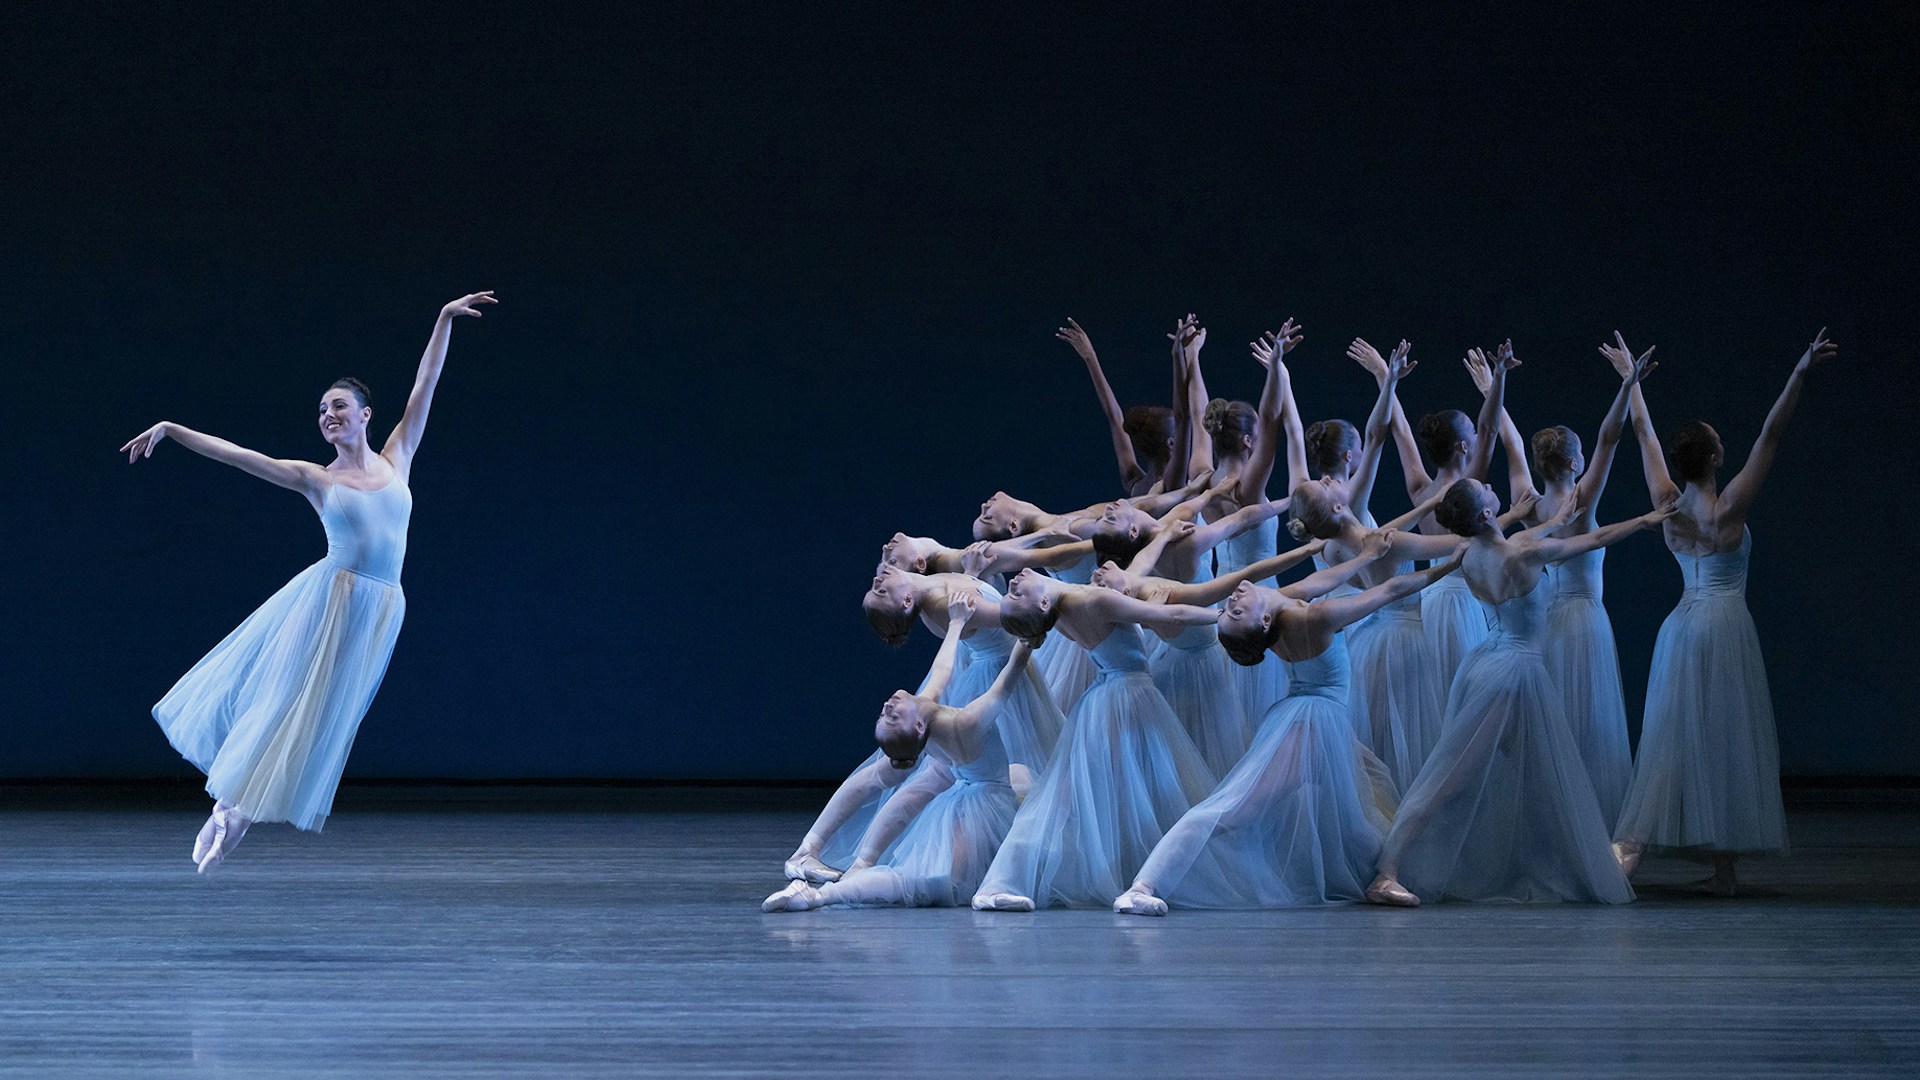 The New York City Ballet Performs Ballets By George Balanchine And Justin Peck